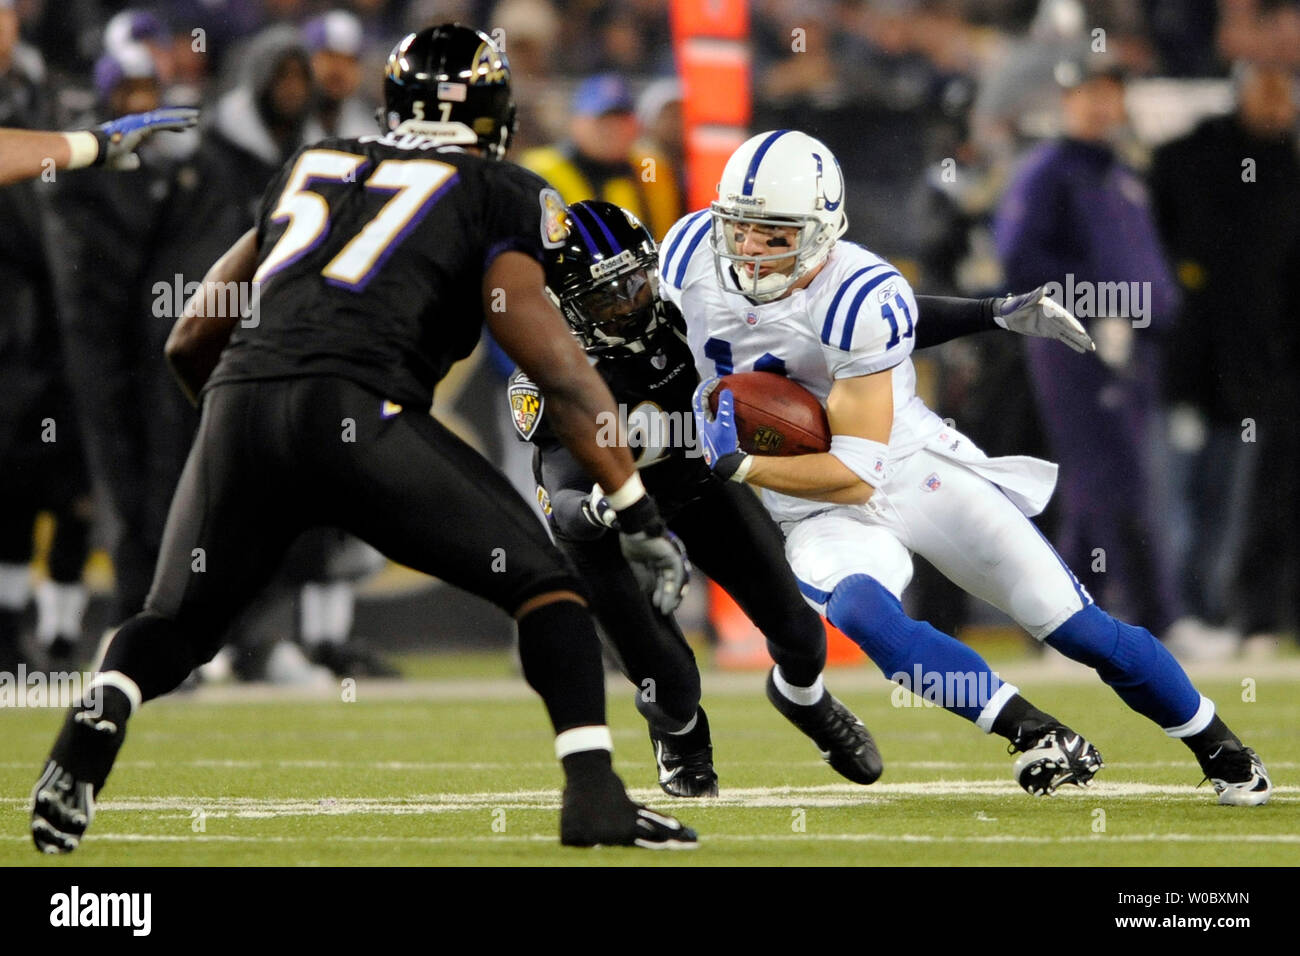 Indianapolis Colts wide receiver Anthony Gonzalez (11) catches a pass for a 15-yard gain in the first quarter before being tackled by Baltimore Ravens safety Dawan Landry (L) on December 9, 2007 at M&T Bank Stadium in Baltimore, Maryland.  (UPI Photo/ Mark Goldman) Stock Photo